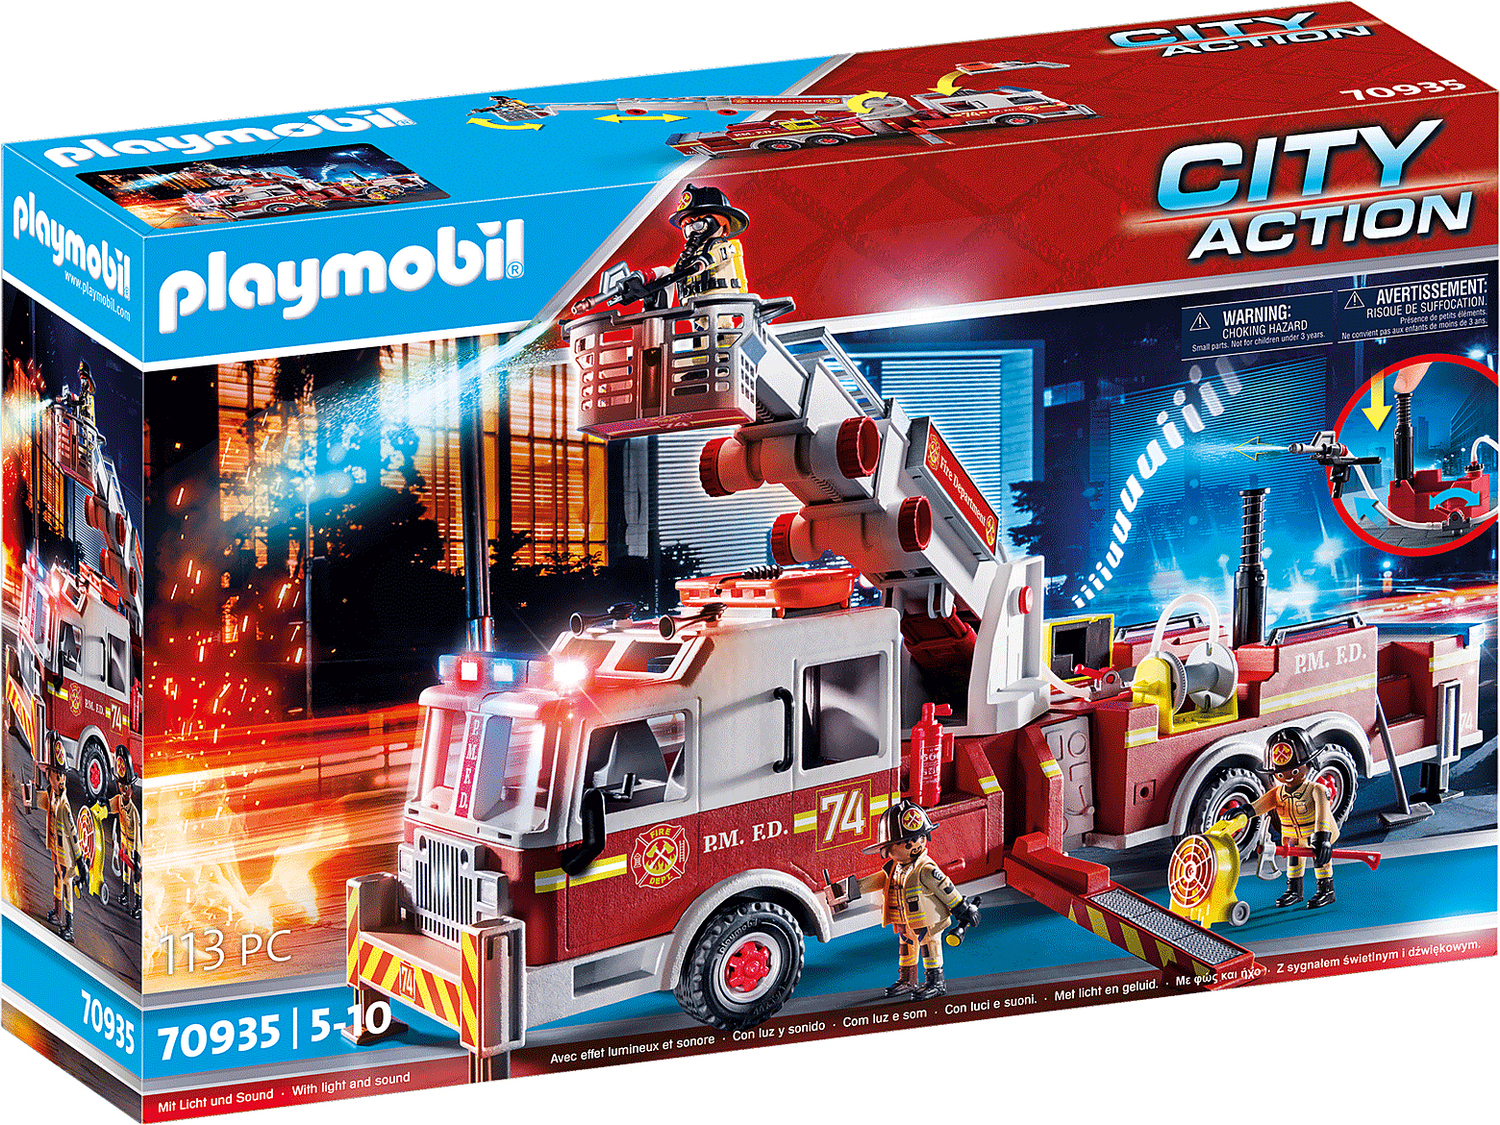 Playmobil City Action Imagination Toys